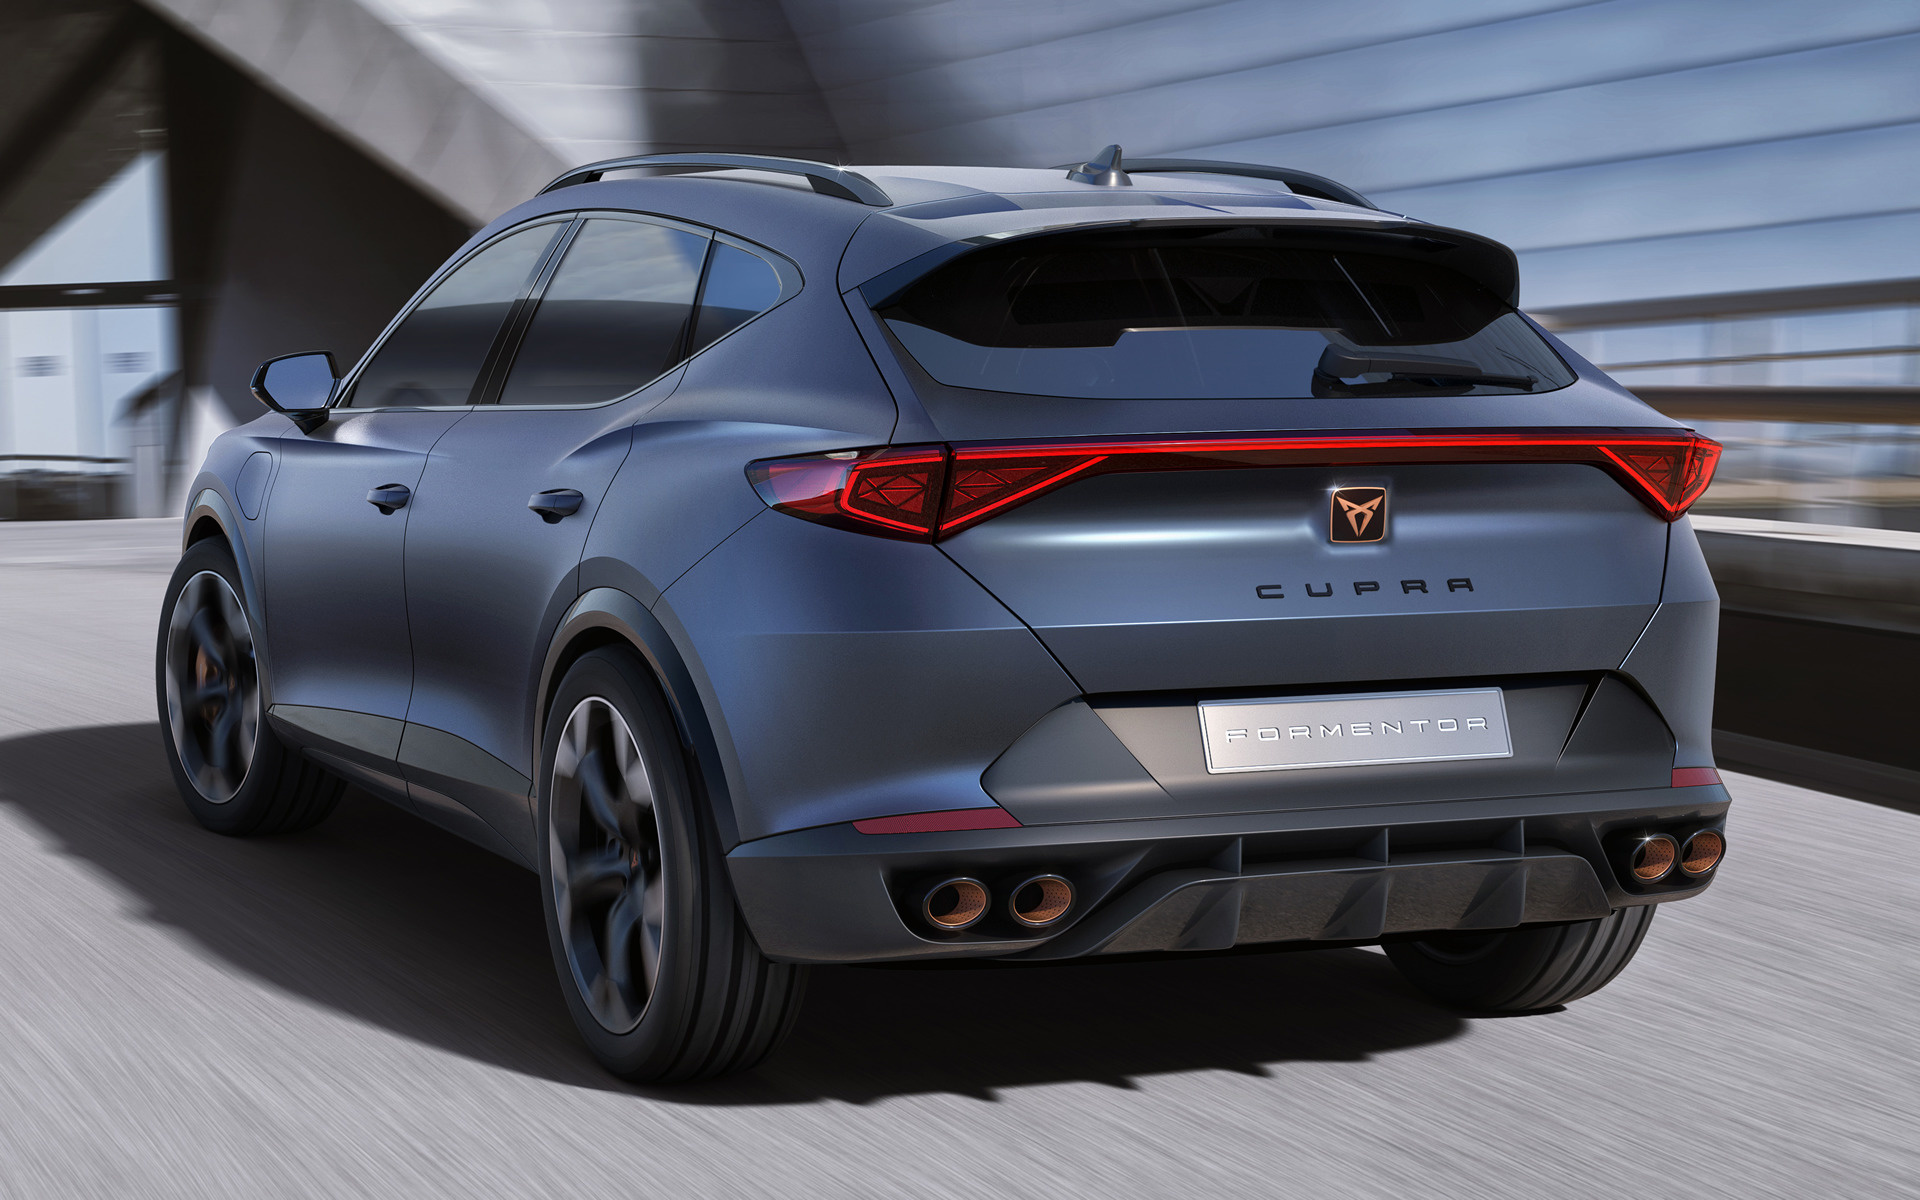 2019 Cupra Formentor Concept - Wallpapers and HD Images | Car Pixel